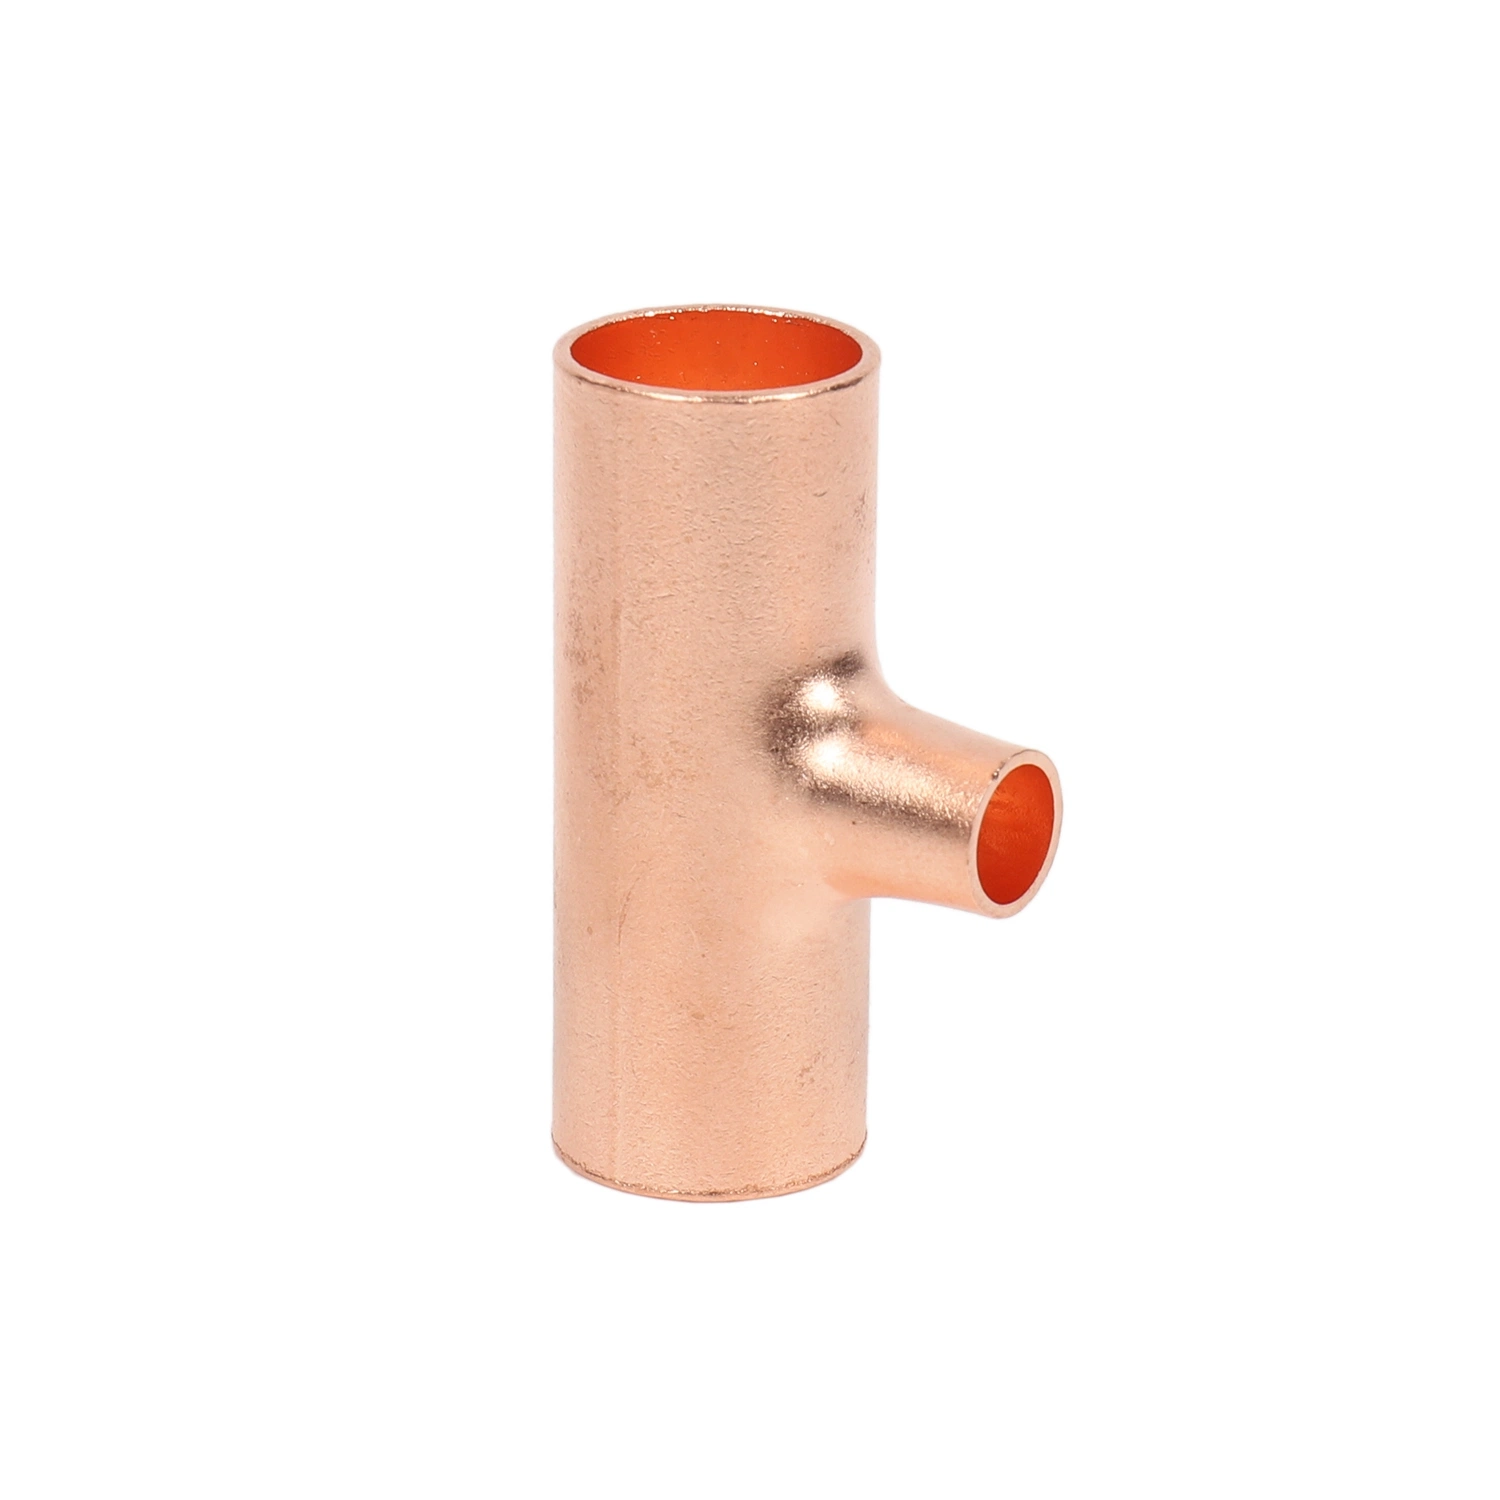 Sweat Copper Tee Equal Press Pipe Connector Refrigeration Pipe Fitting Plumb Copper Tee Fittings Equal Reducing Tee Copper Pipe